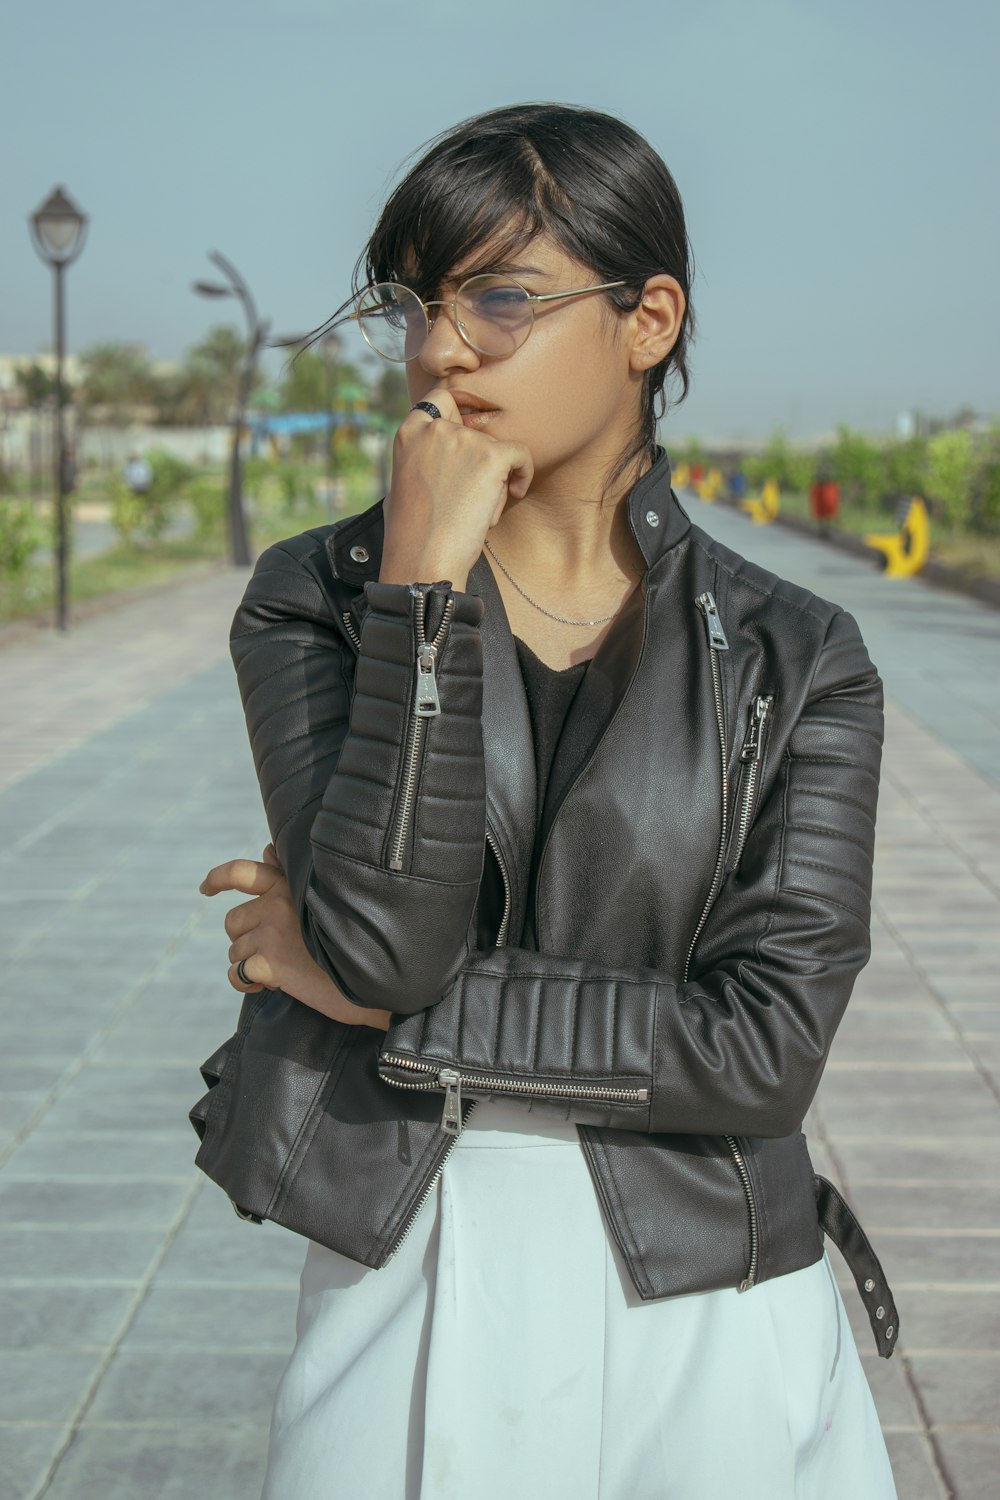 a woman wearing a black leather jacket and glasses